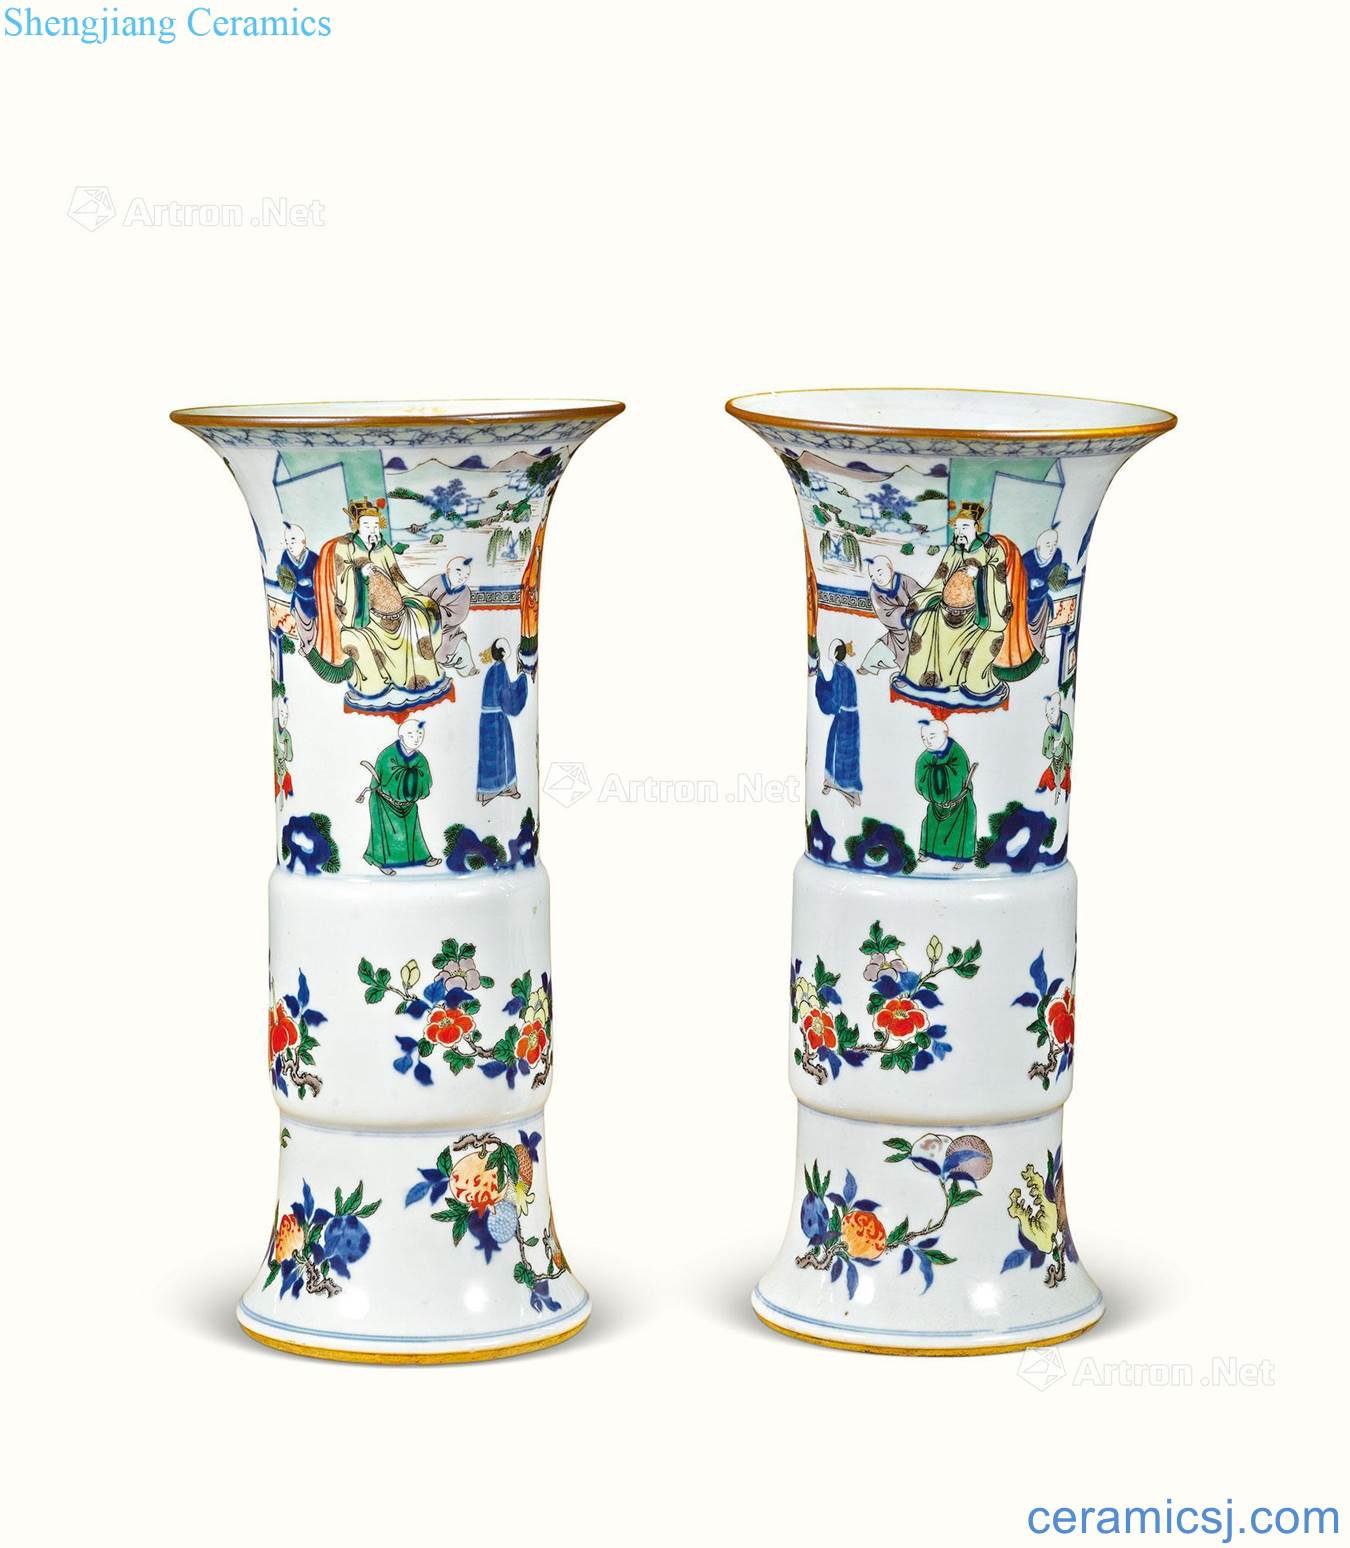 Qing stories of colorful flower vase with (a)